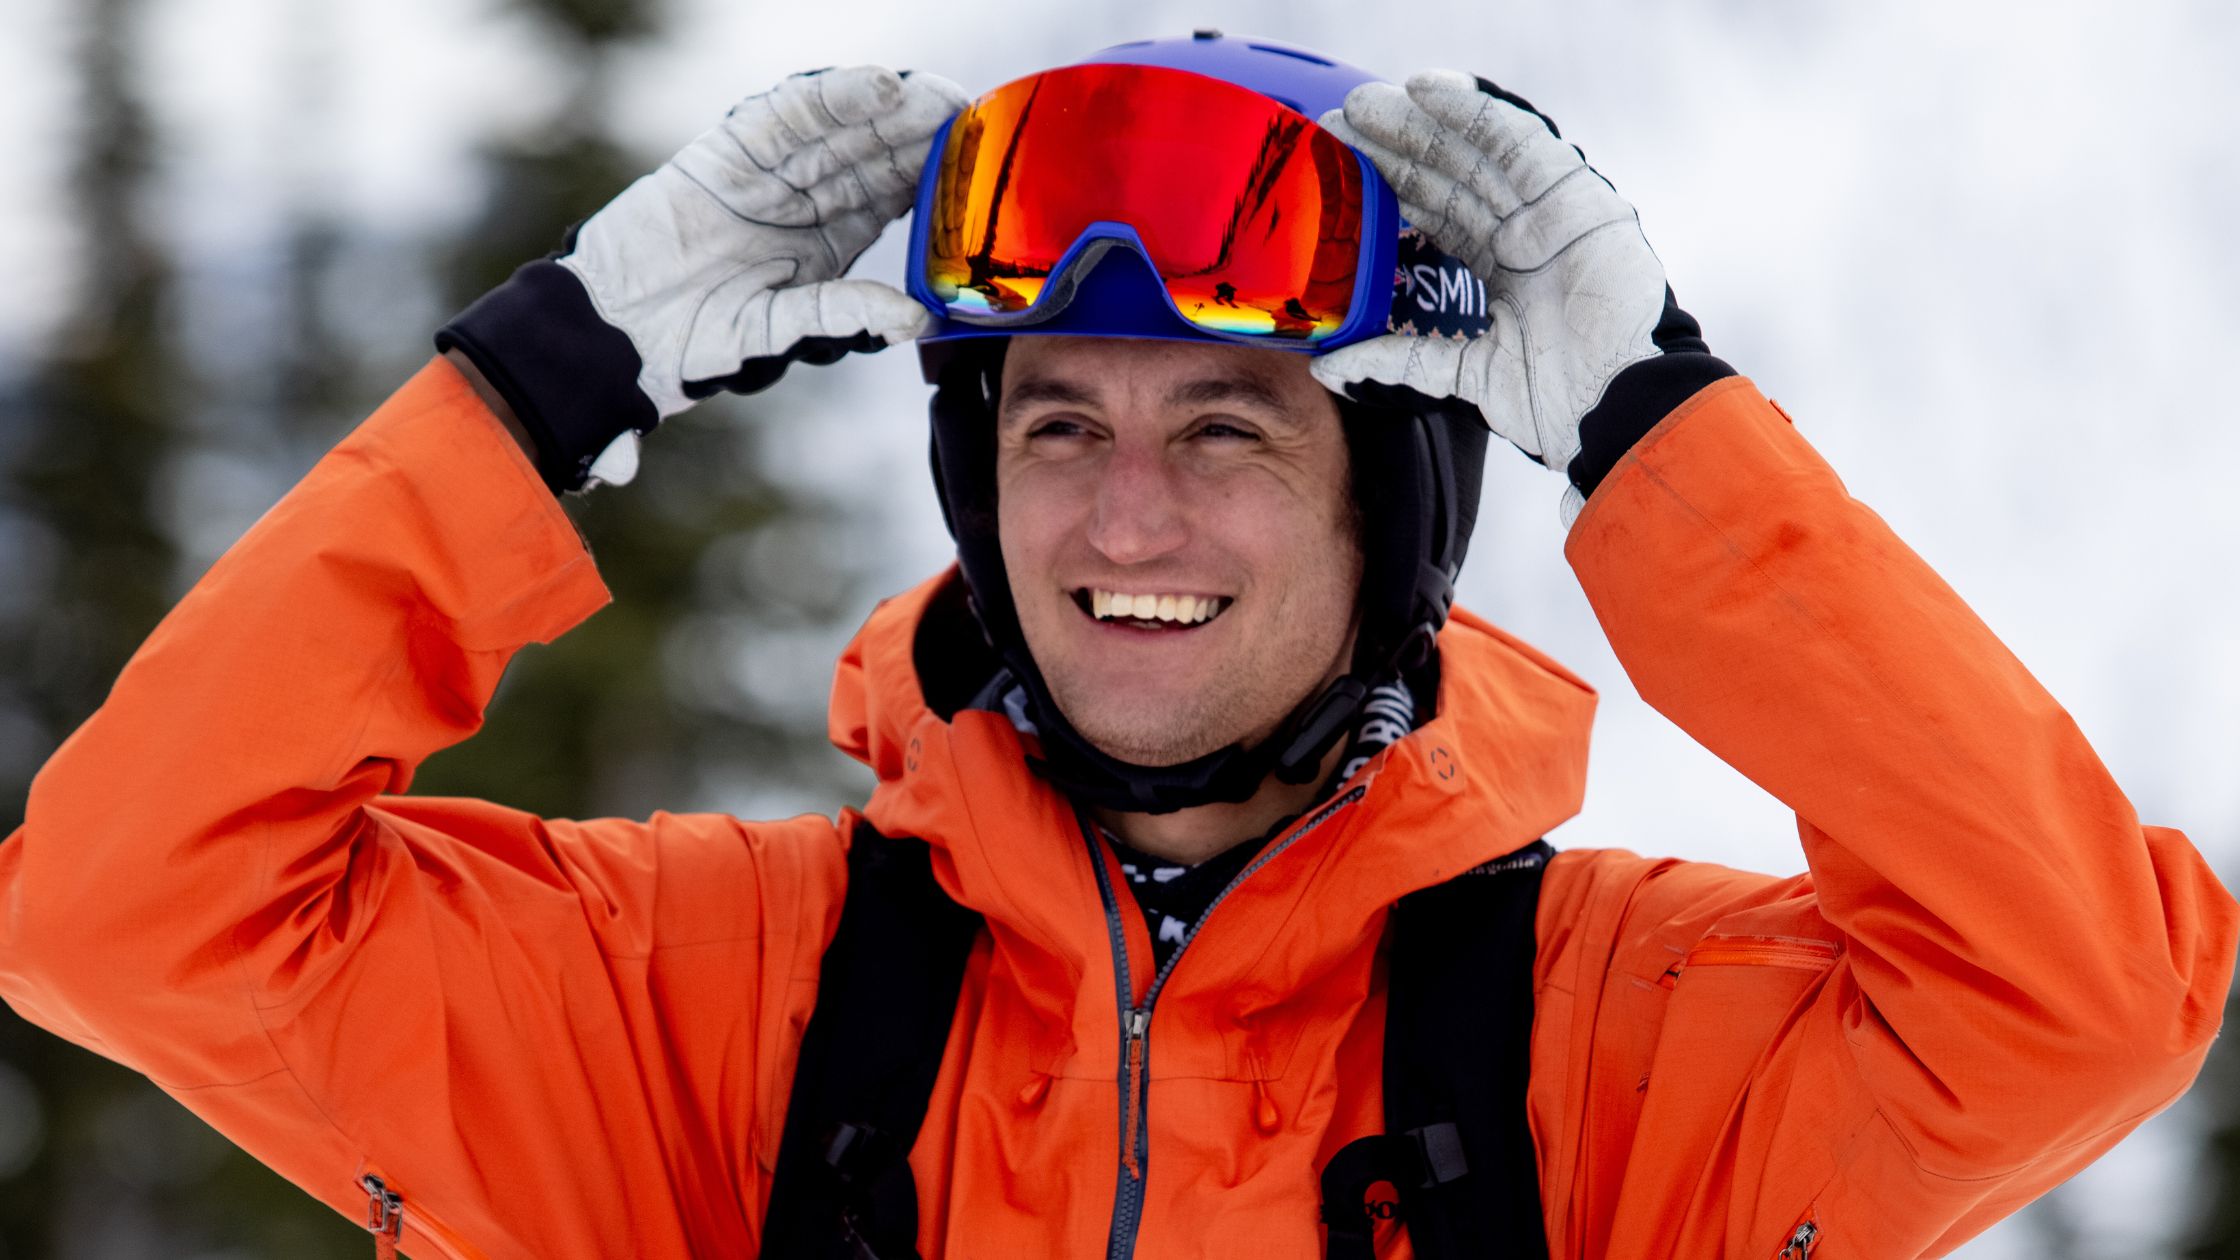 Connor Ryan and Natives Outdoors Are Making the Slopes More Inclusive